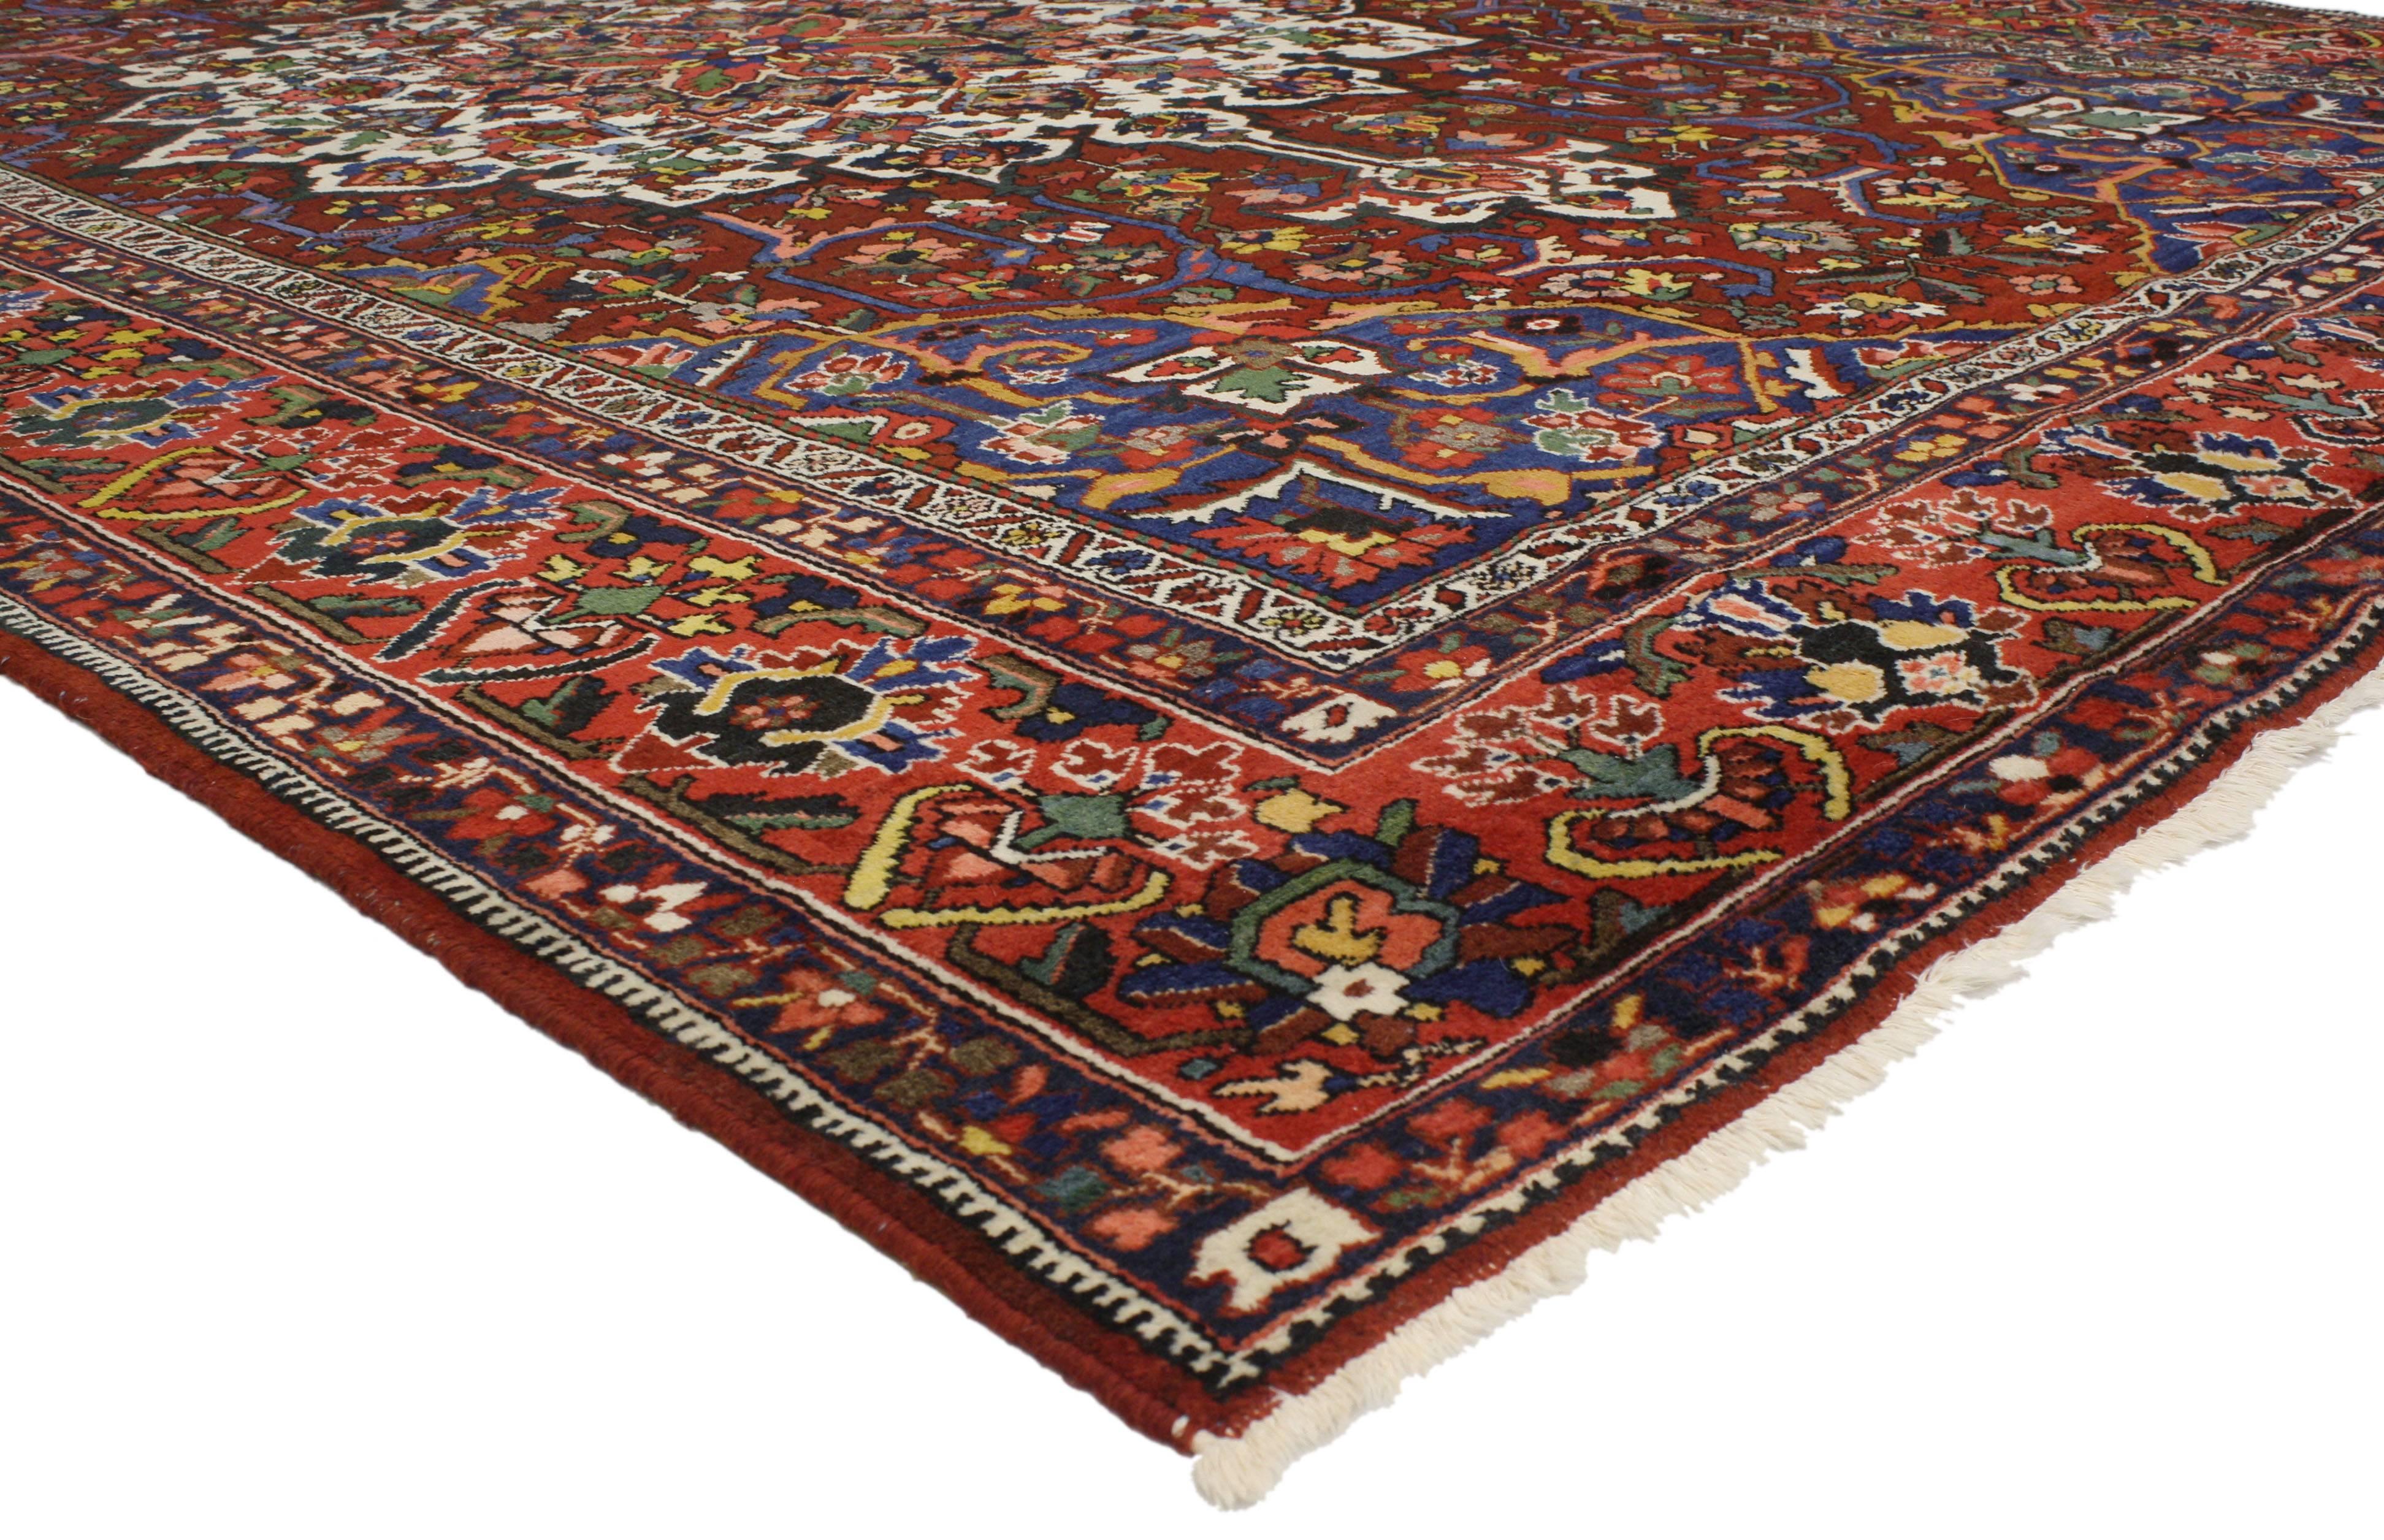 Full of character and highly decorative, this antique Persian Bakhtiari rug with Traditional Modern style features an elaborate centre medallion and ornate spandrels surrounded by all-over geometric motifs. Set off from a majestic deep red field and